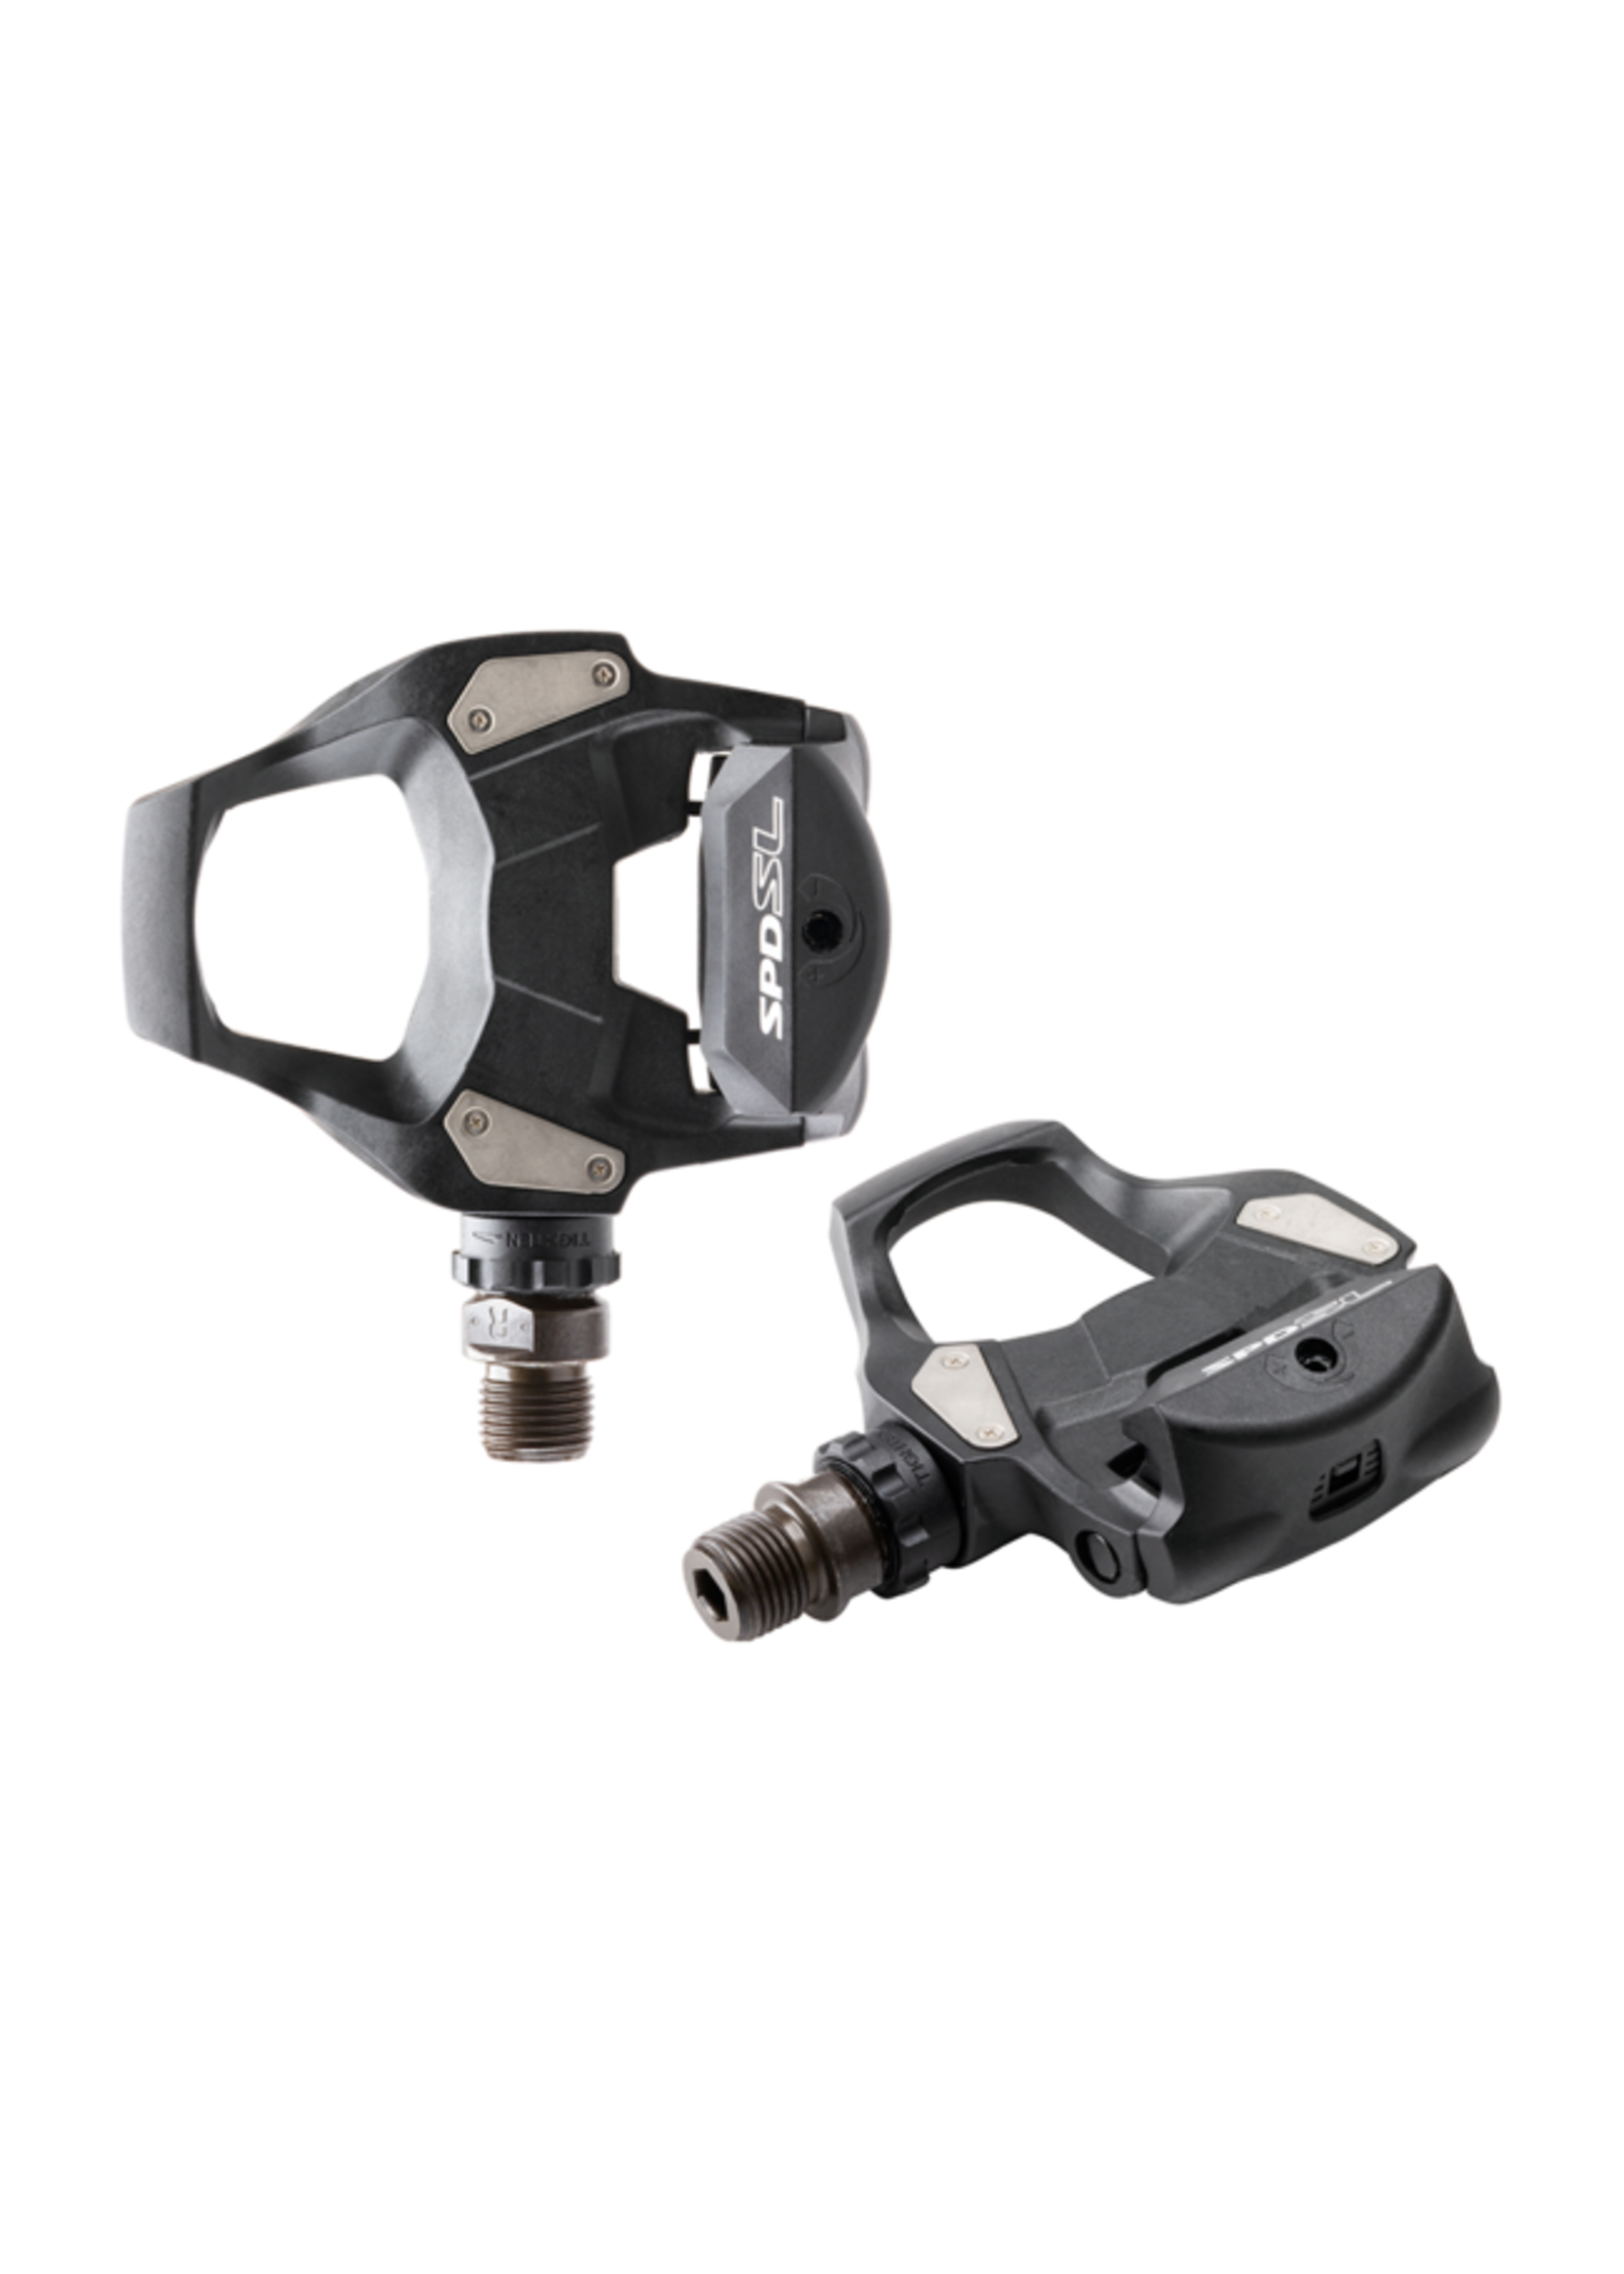 Shimano PEDAL, PD-RS500, SPD-SL PEDAL, W/CLEAT(SM-SH11)